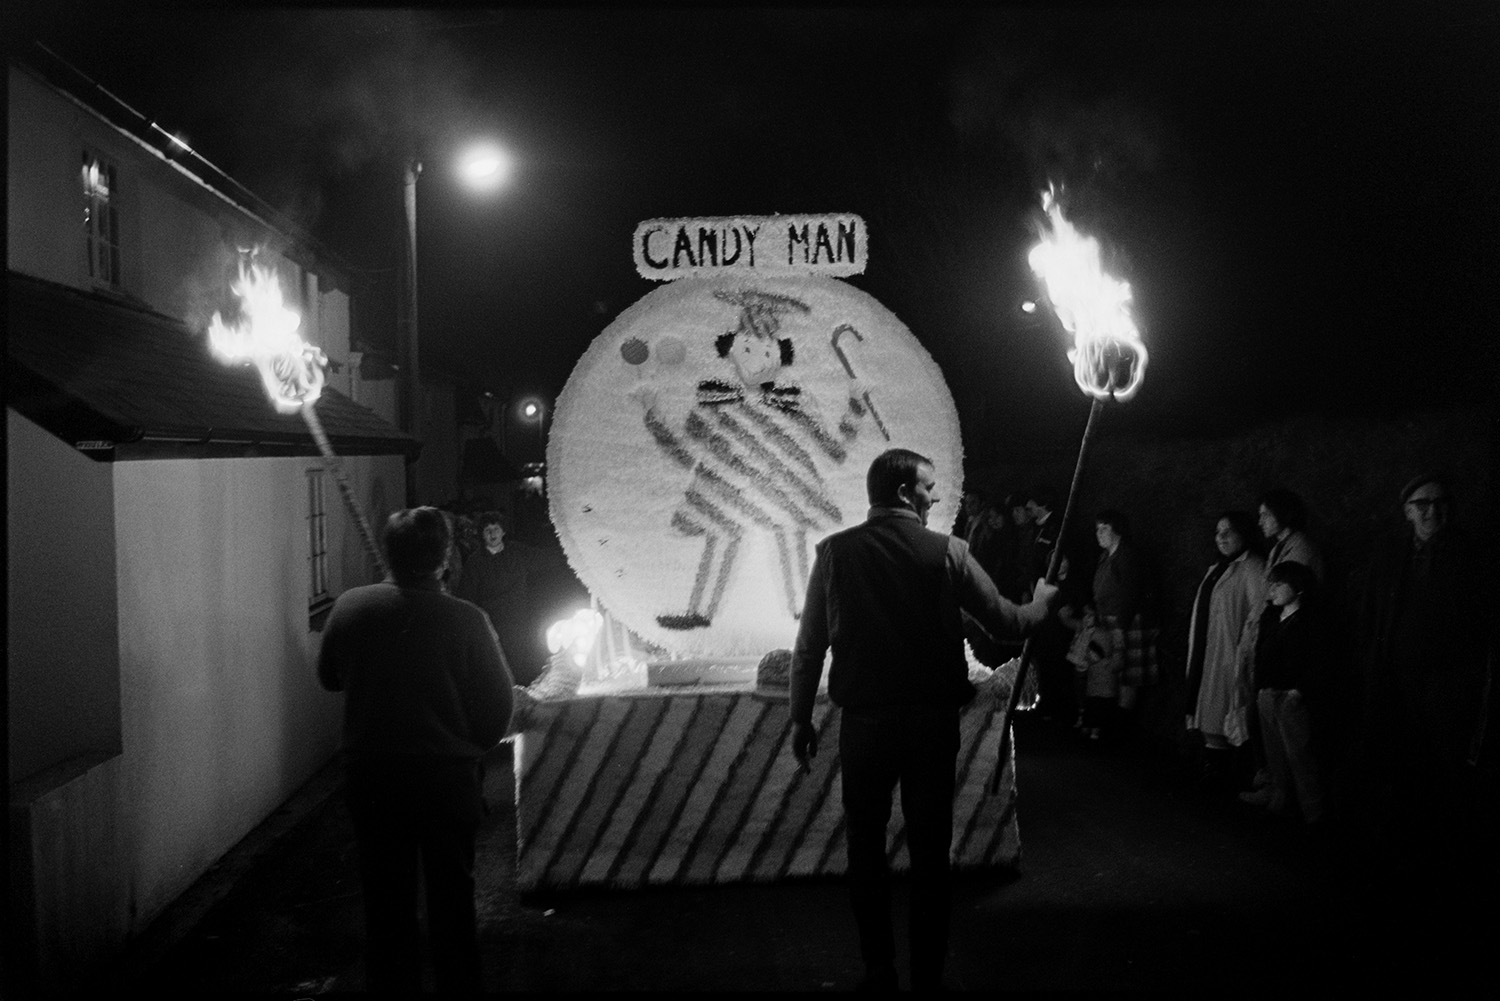 Carnival floats at night, queen and attendants, fancy dress with burning torches.
[A carnival float during the evening procession at Dolton Carnival. Two men are walking with burning torches behind a carnival float called 'Candy Man'. Spectators are watching the procession.]